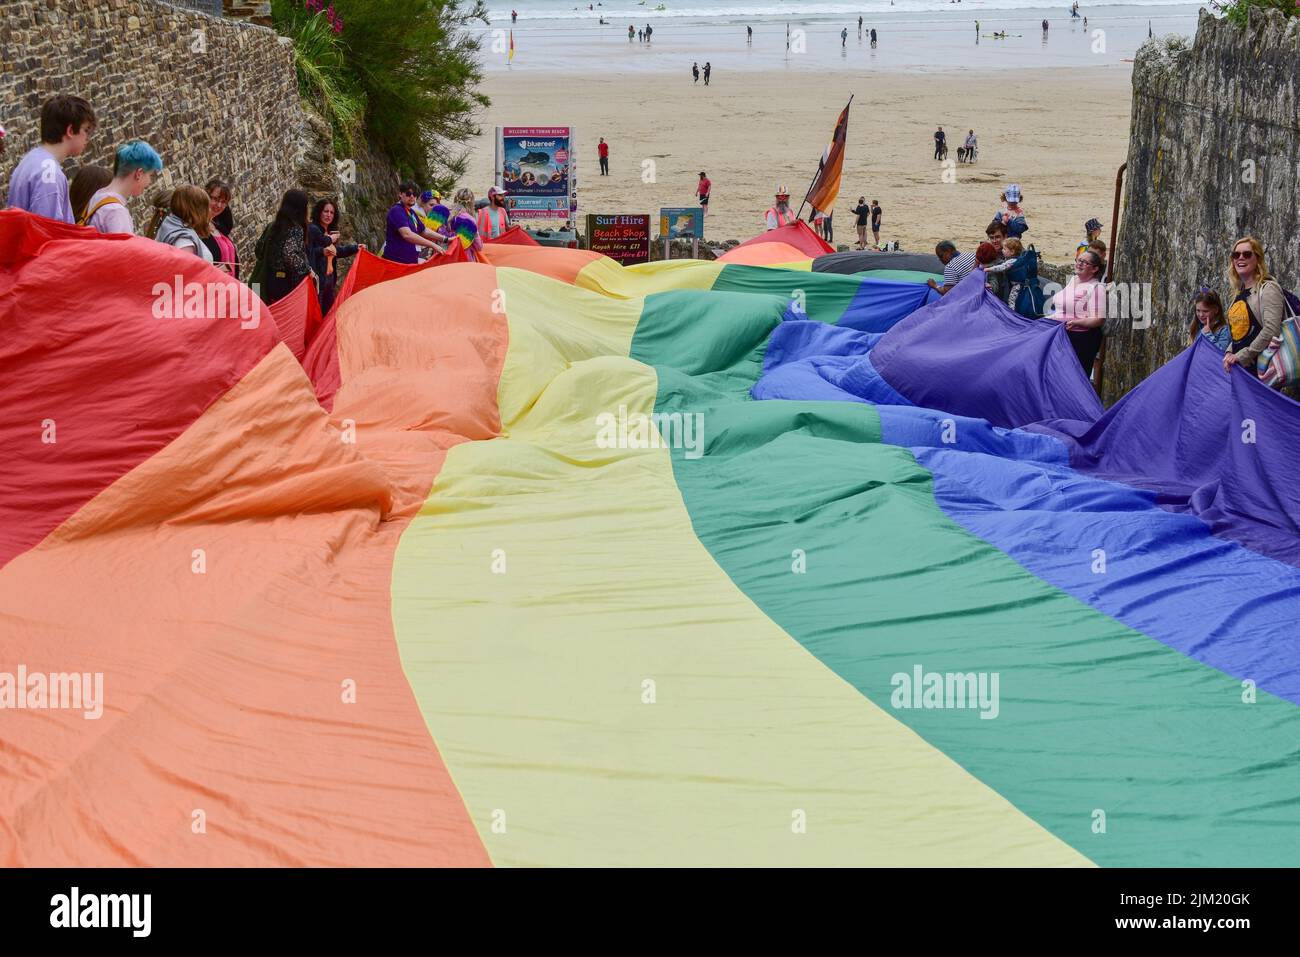 The huge vibrant colourful Cornwall Prides Pride flag banner held by participants in the parade at Towan Beach Newquay in the UK. Stock Photo